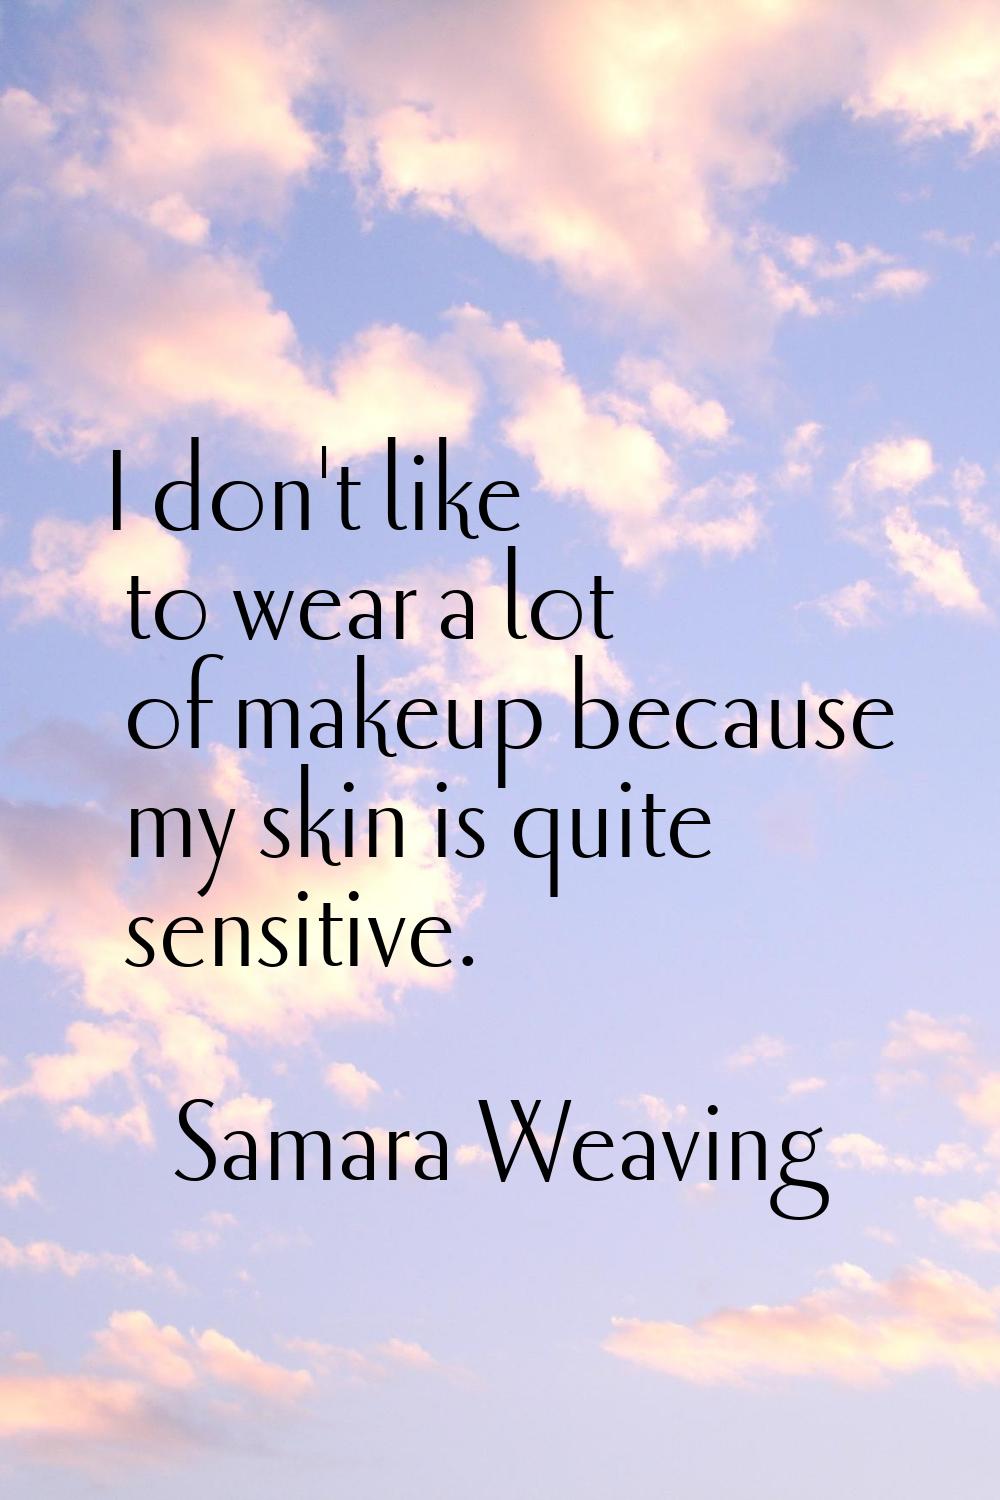 I don't like to wear a lot of makeup because my skin is quite sensitive.